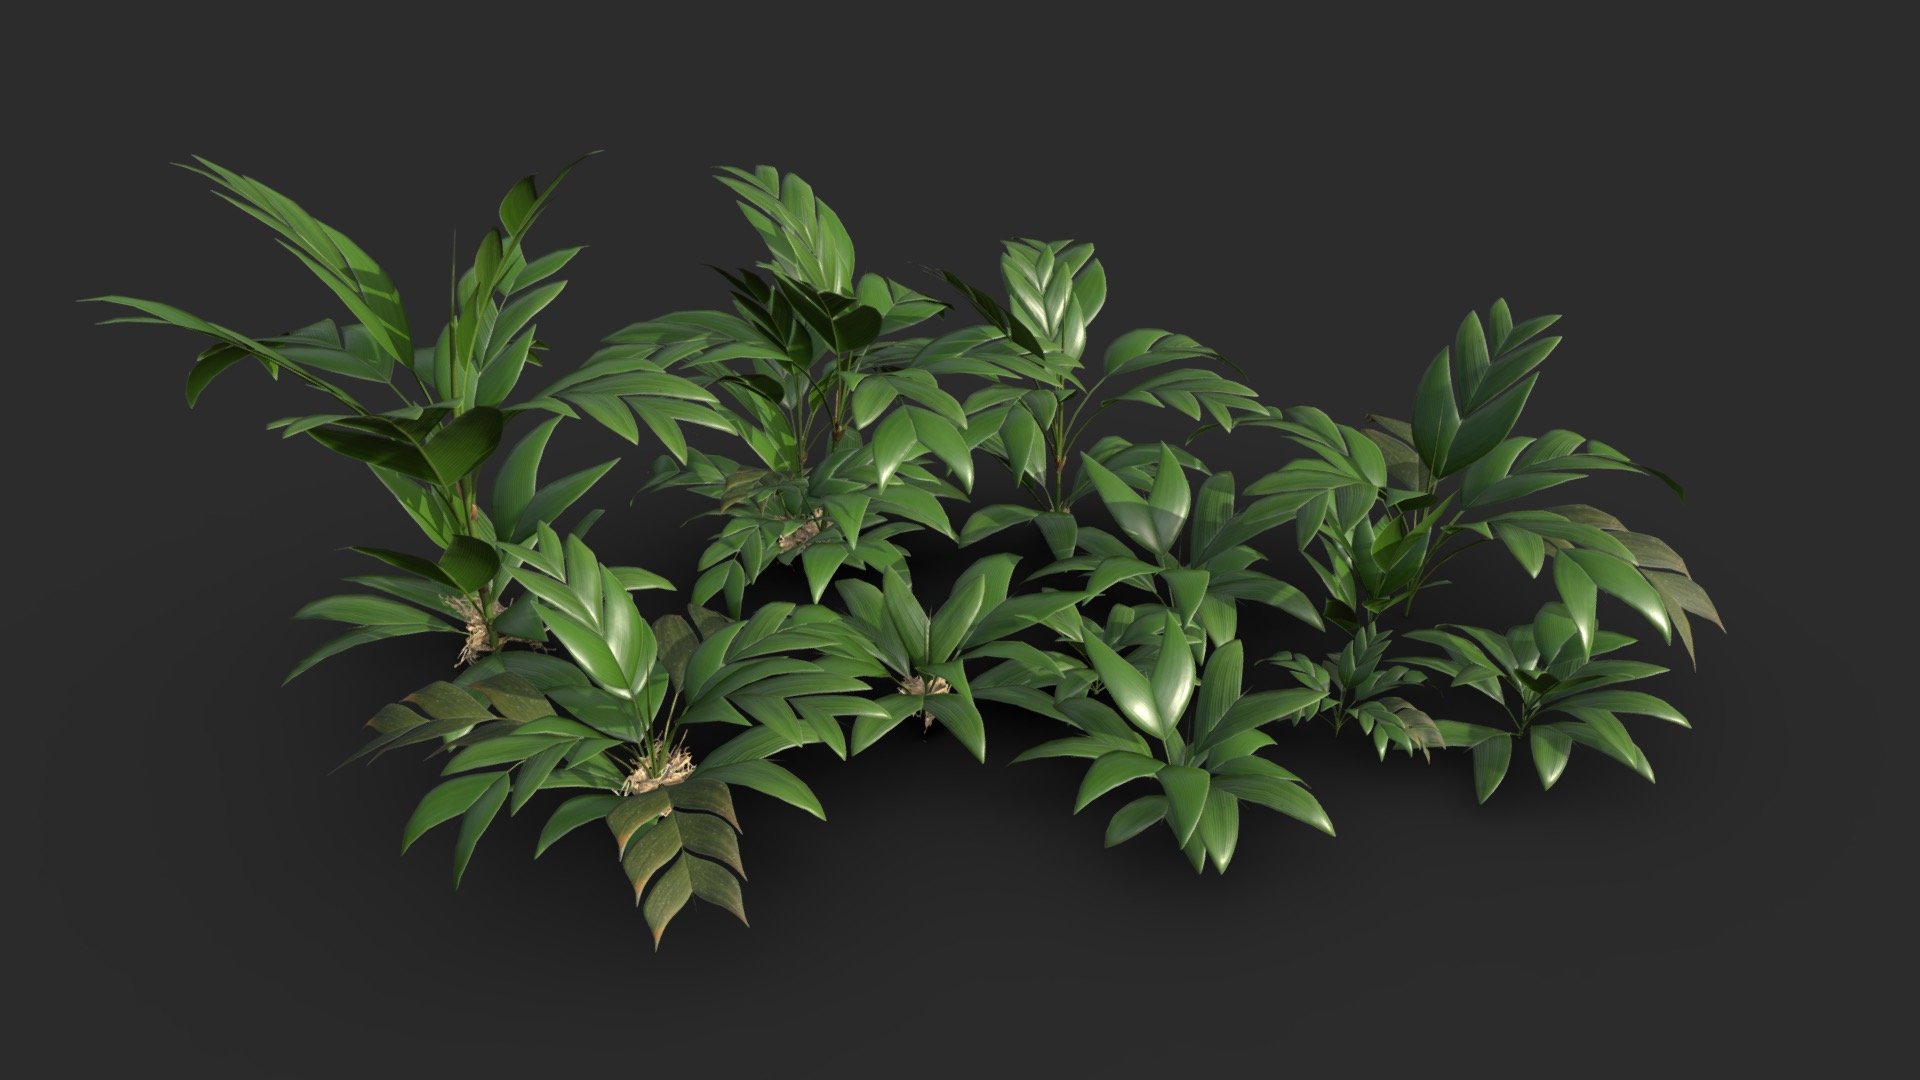 This tasi palm set includes 8 different tropical palm shrubs and a modular set including 6 trunks and 10 foliage’s heads. The 25 palm props are ready for game in lowpoly and PBR.

Those small palms growth up to 2 m height mostly undergrowth of tropical rainforests (in all Amazon Bassin). 

The assets is available in realistic style and can be used in any game (post-apocaliptic, first or third person, GTA like, survival… ). All objects share a unique material for the best optimization for games.

Those AAA game assets pack  will embellish your scene and add more details which can help the gameplayand the game design. 

SPECIFICATIONS




Objects : 25

Polygons : 21076

GAME SPECS




LODs : Yes (inside FBX for Unity &amp; Unreal)

Numbers of LODs : 4

Collider : Yes

TEXTURES




Materials in scene : 2

Textures sizes : 2K (1K for the billboard)

Textures types : Base Color, Metallic, Roughness, Normal (DirectX &amp; OpenGL), Heigh &amp; AO (also Unity &amp; Unreal ARM workflow maps)

Textures format : PNG
 - Modular Tasi Palm Trees - Geonoma Baculifera - Buy Royalty Free 3D model by KangaroOz 3D (@KangaroOz-3D) 3d model